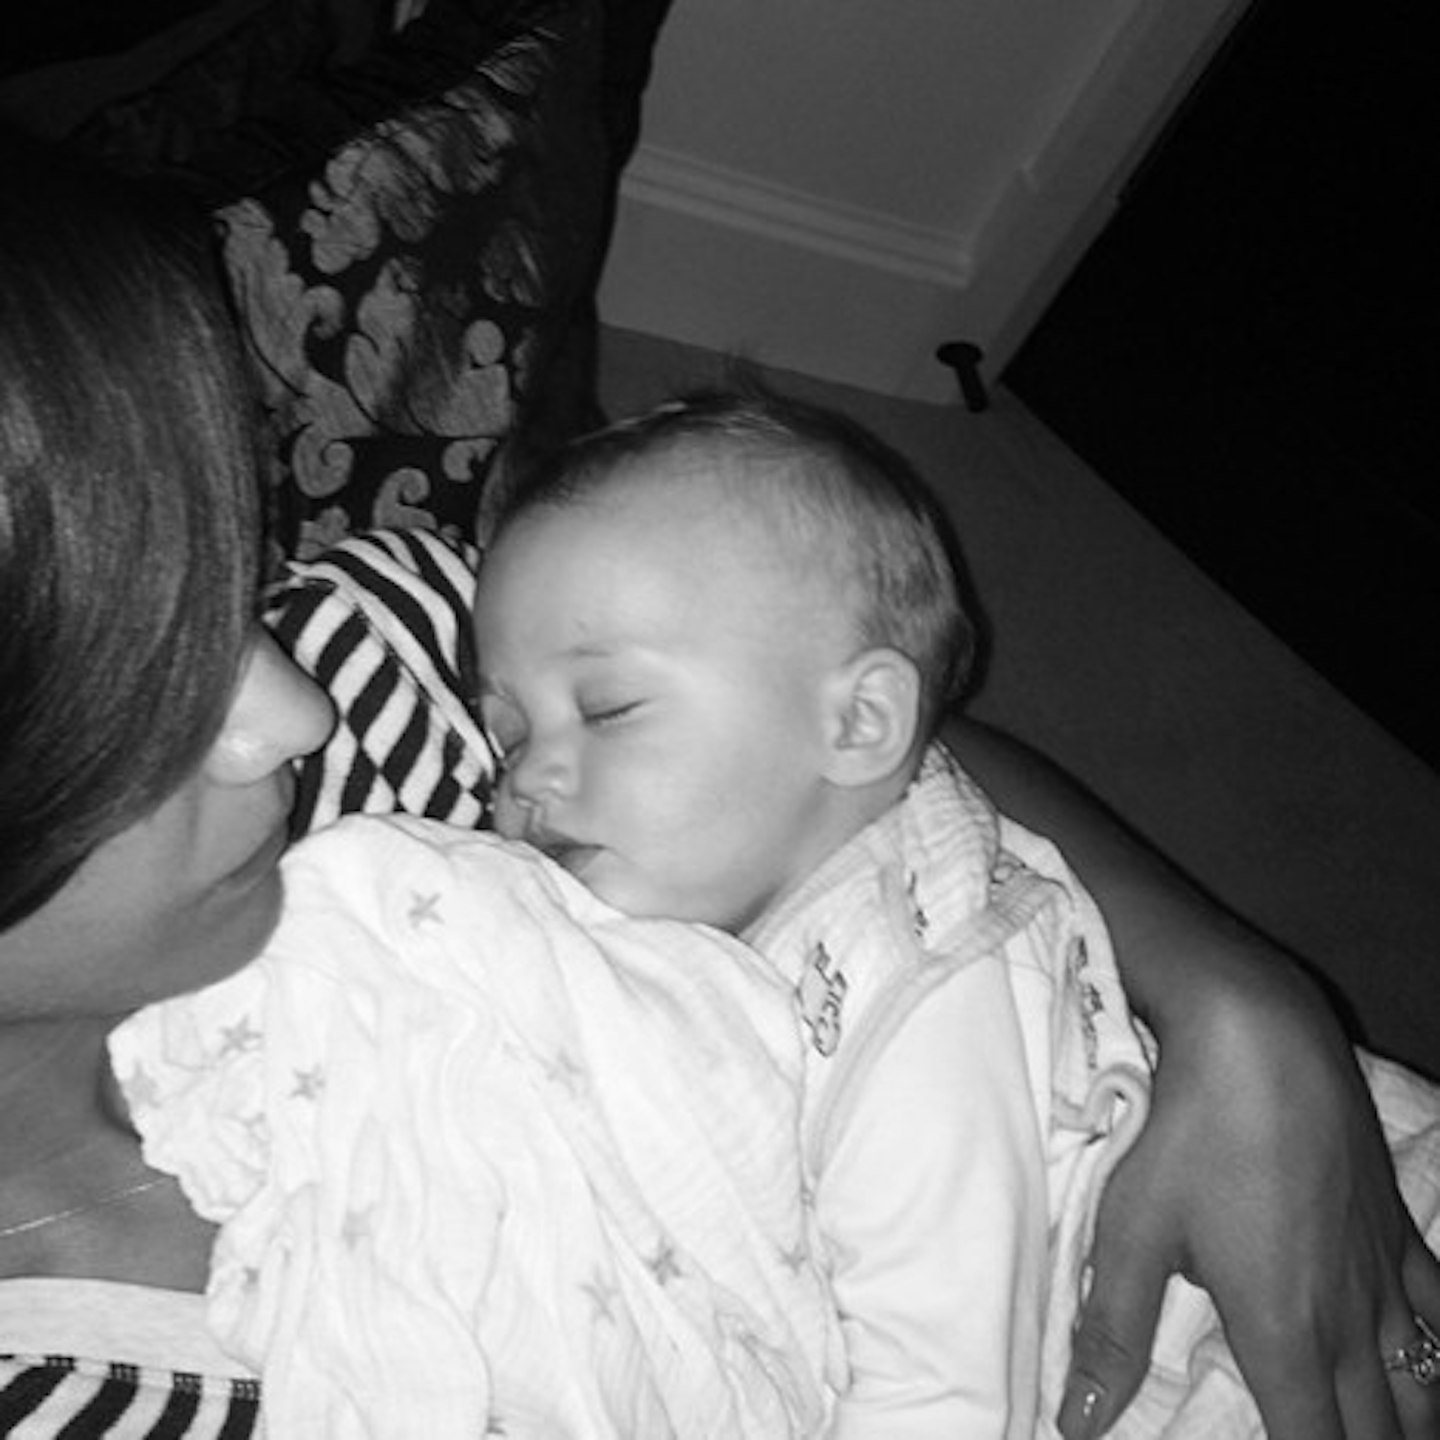 We bet Frankie couldn't wait to be reunited with baby Parker